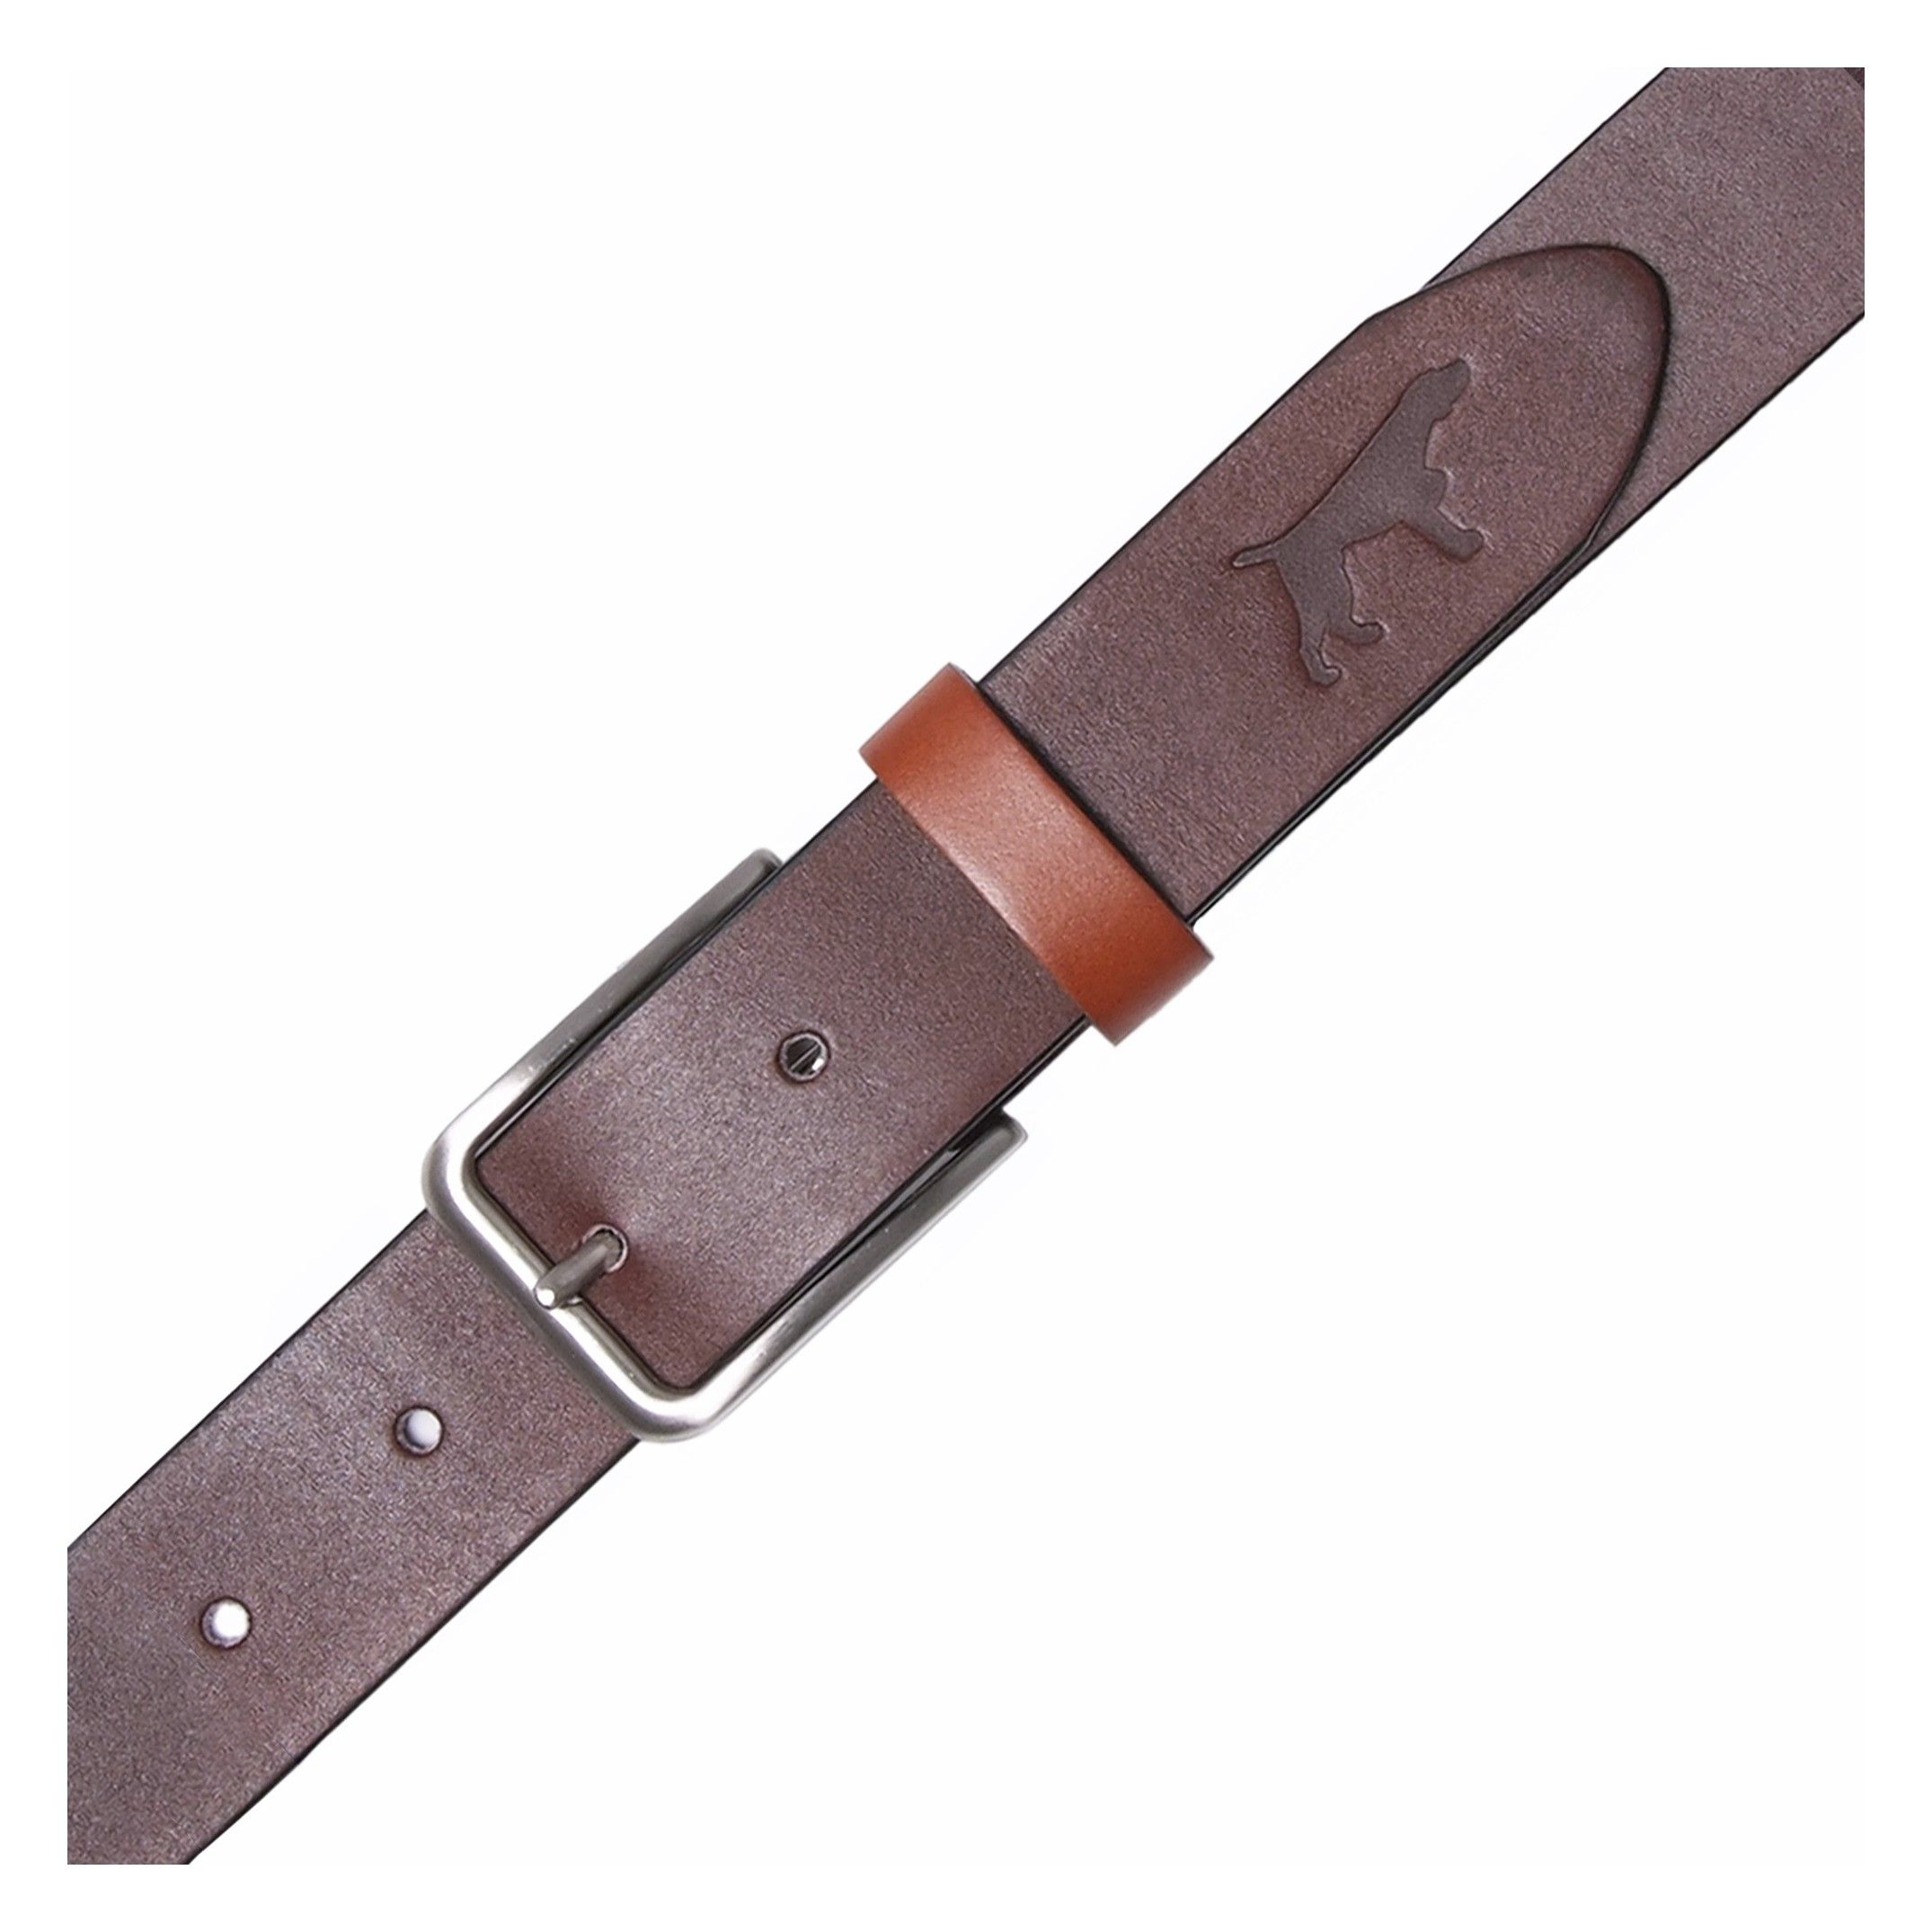 Leather belt bicolor.  Width: 3.5 cm . Made in Spain. By Castellanisimos